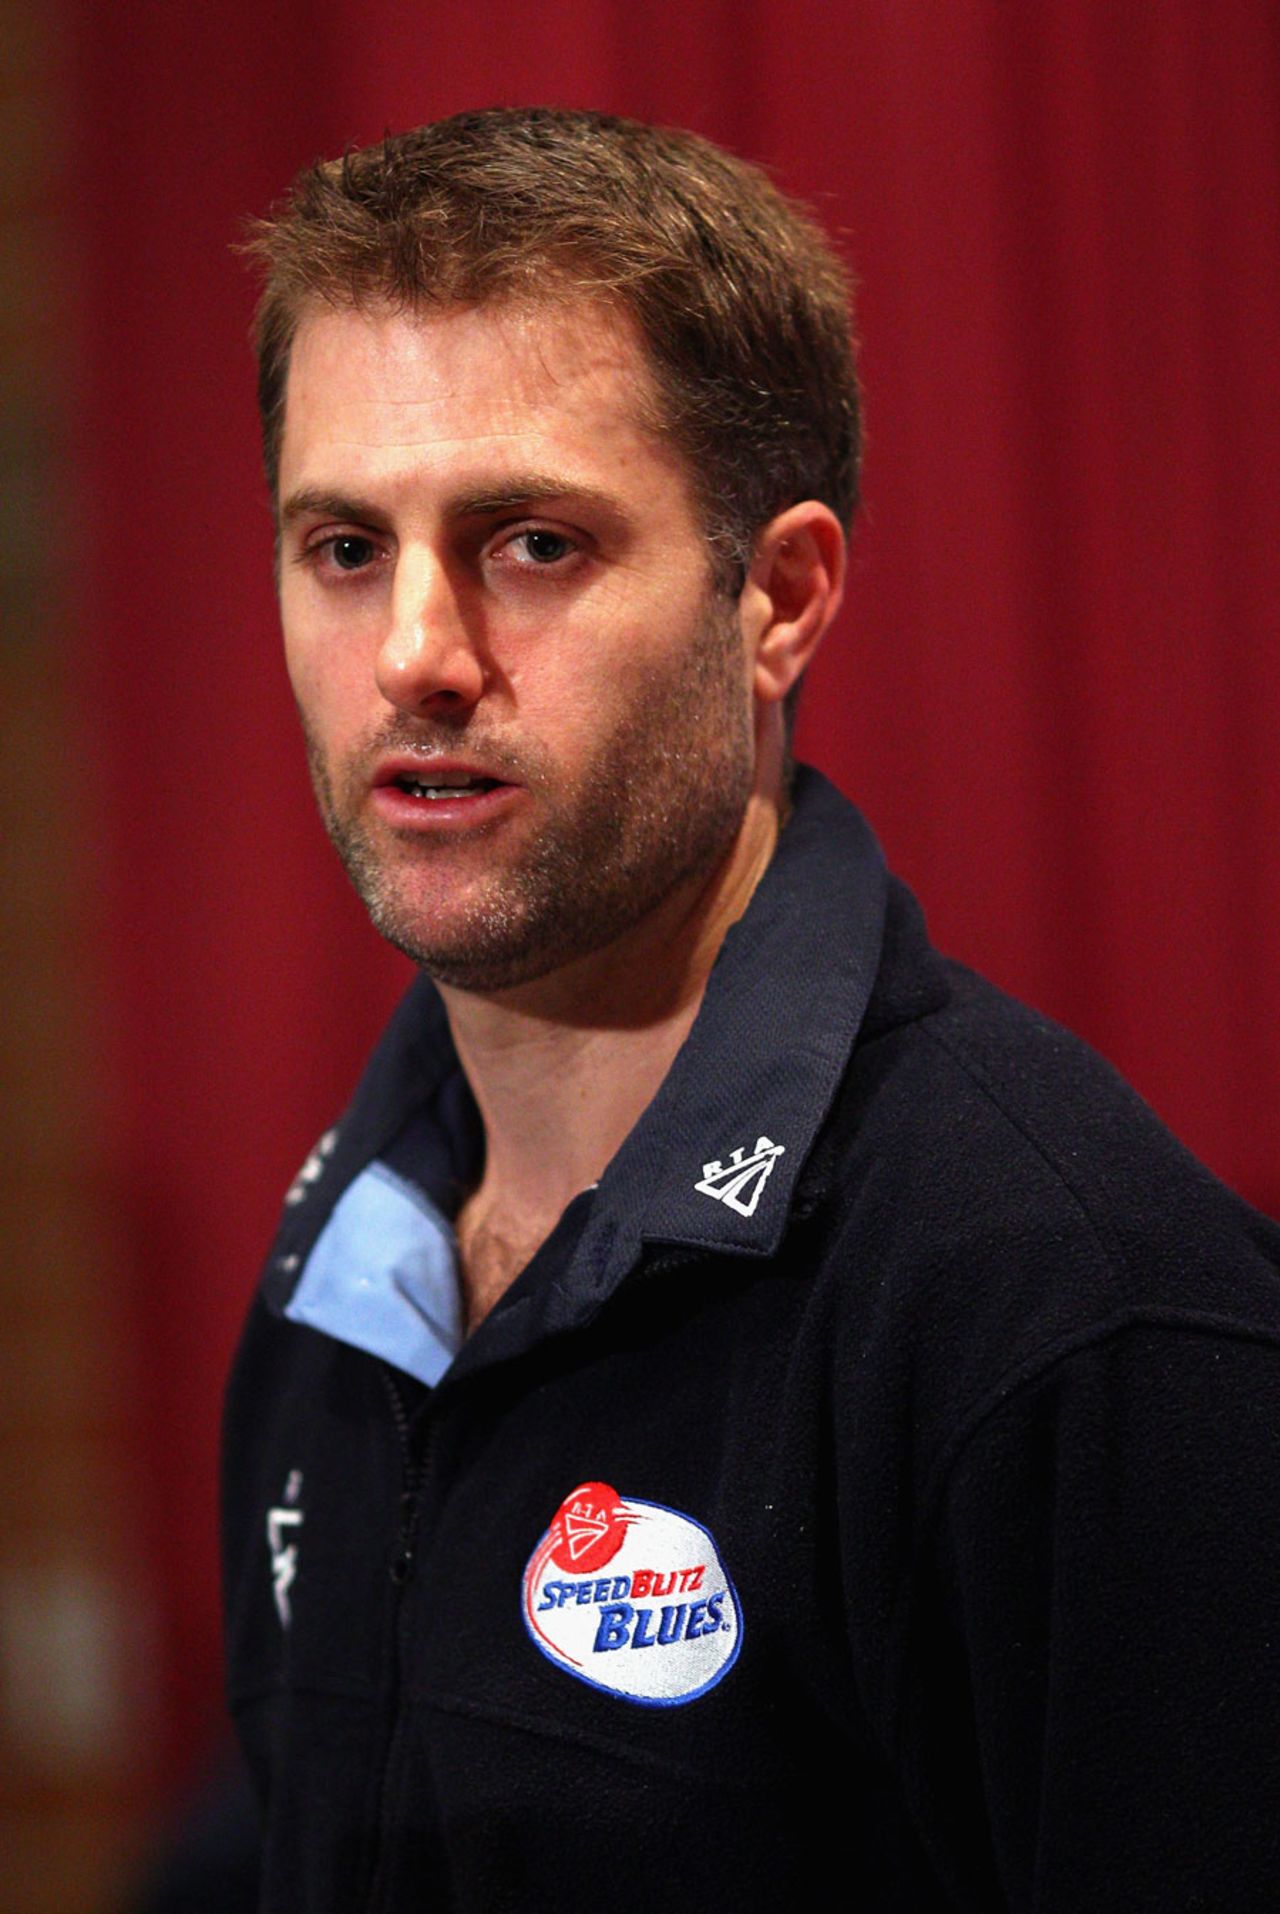 Simon Katich speaks at a press conference, Sydney, June 10, 2011